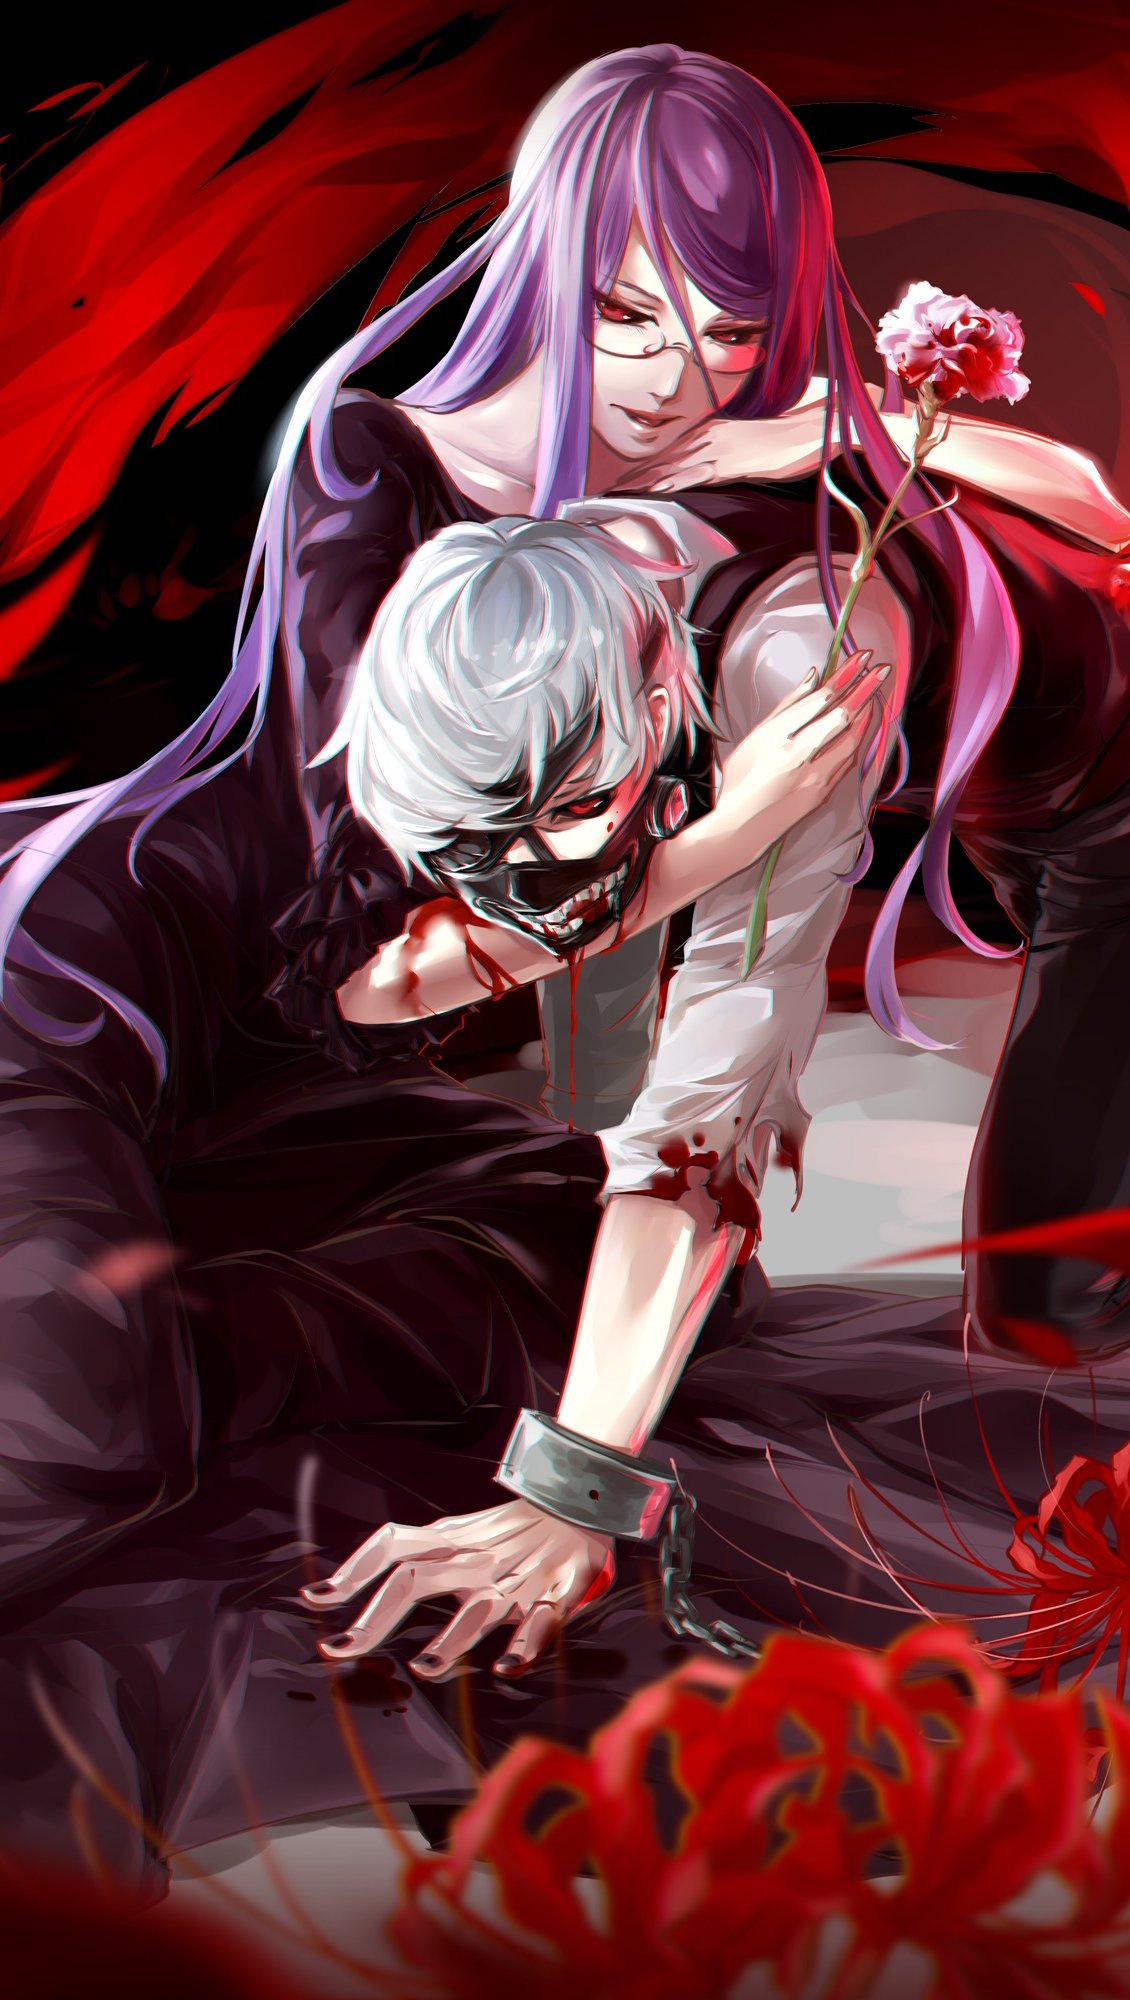 Characters from Tokyo Ghoul Anime Wallpaper